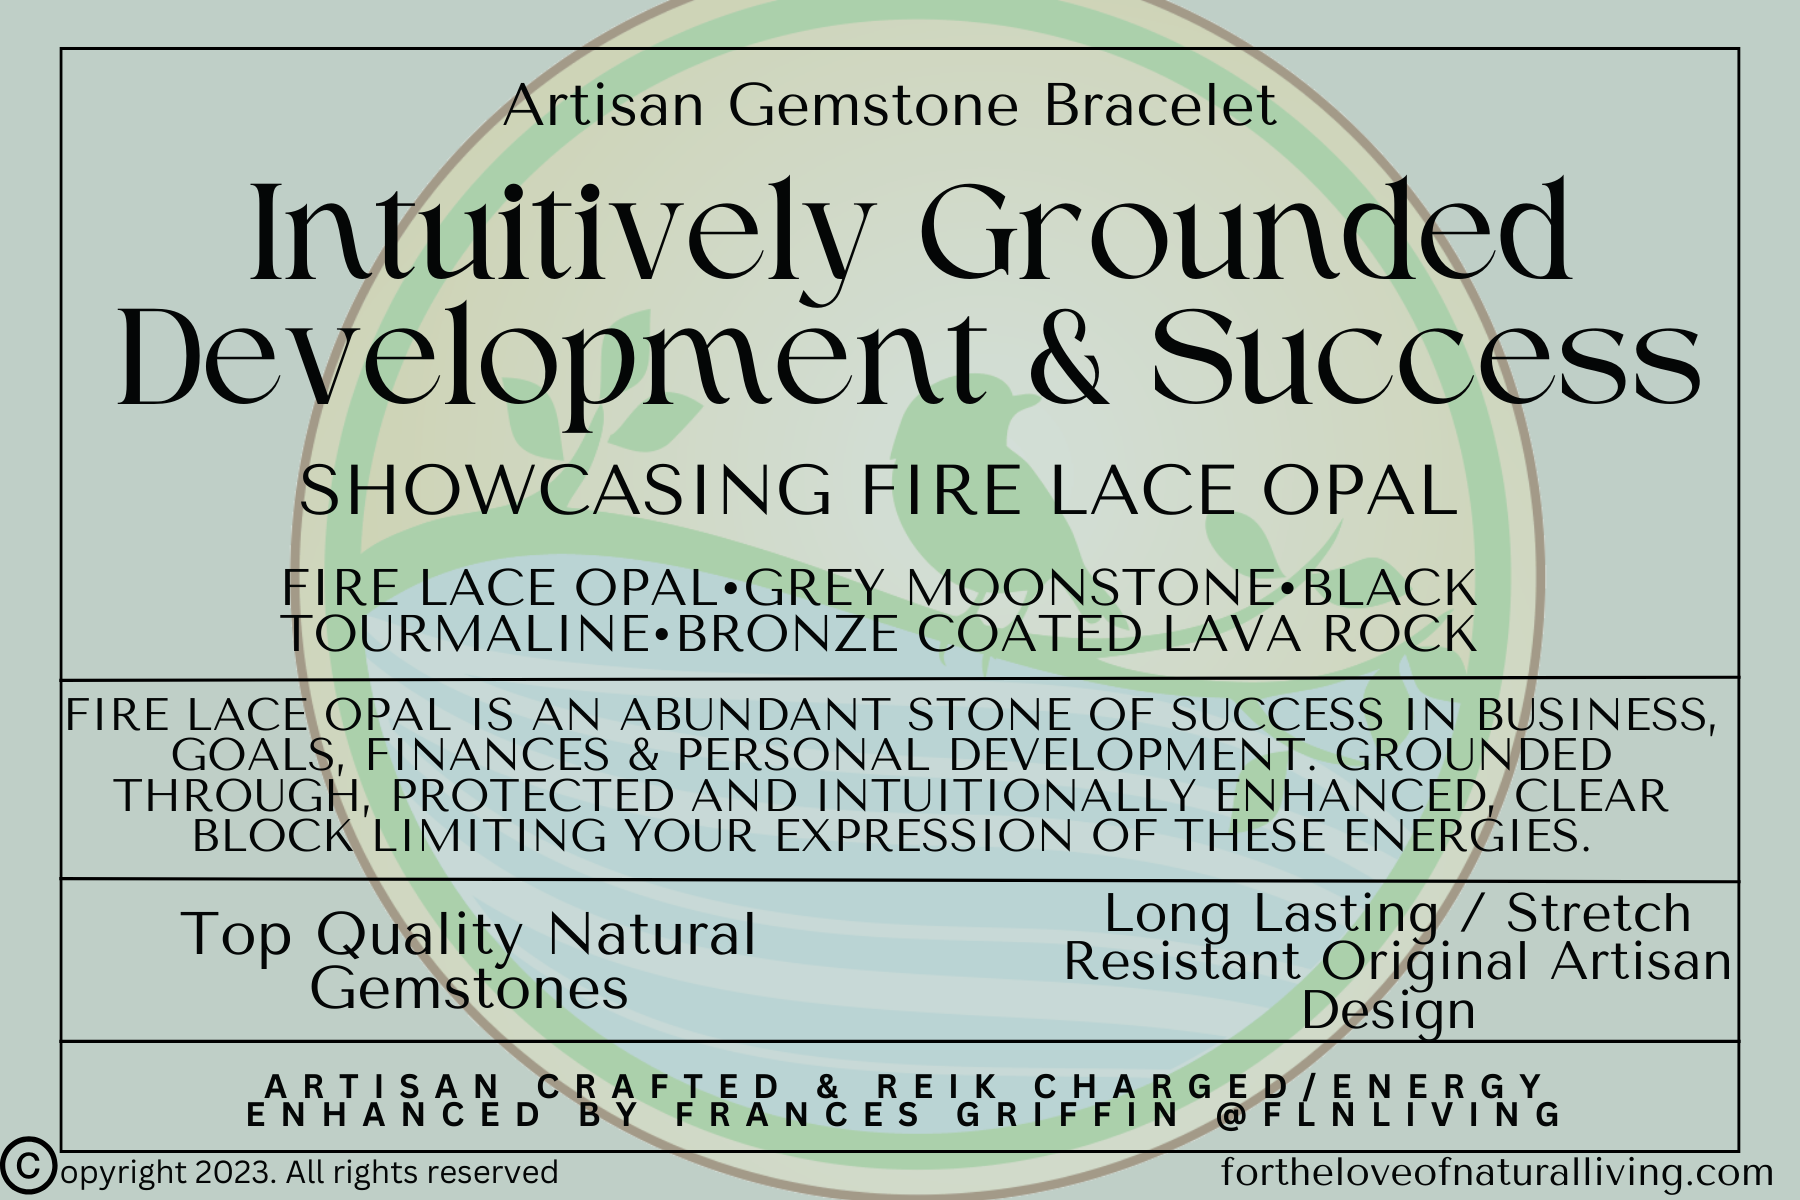 Intuitively Grounded Development & Success - For the Love of Natural Living, LLC 